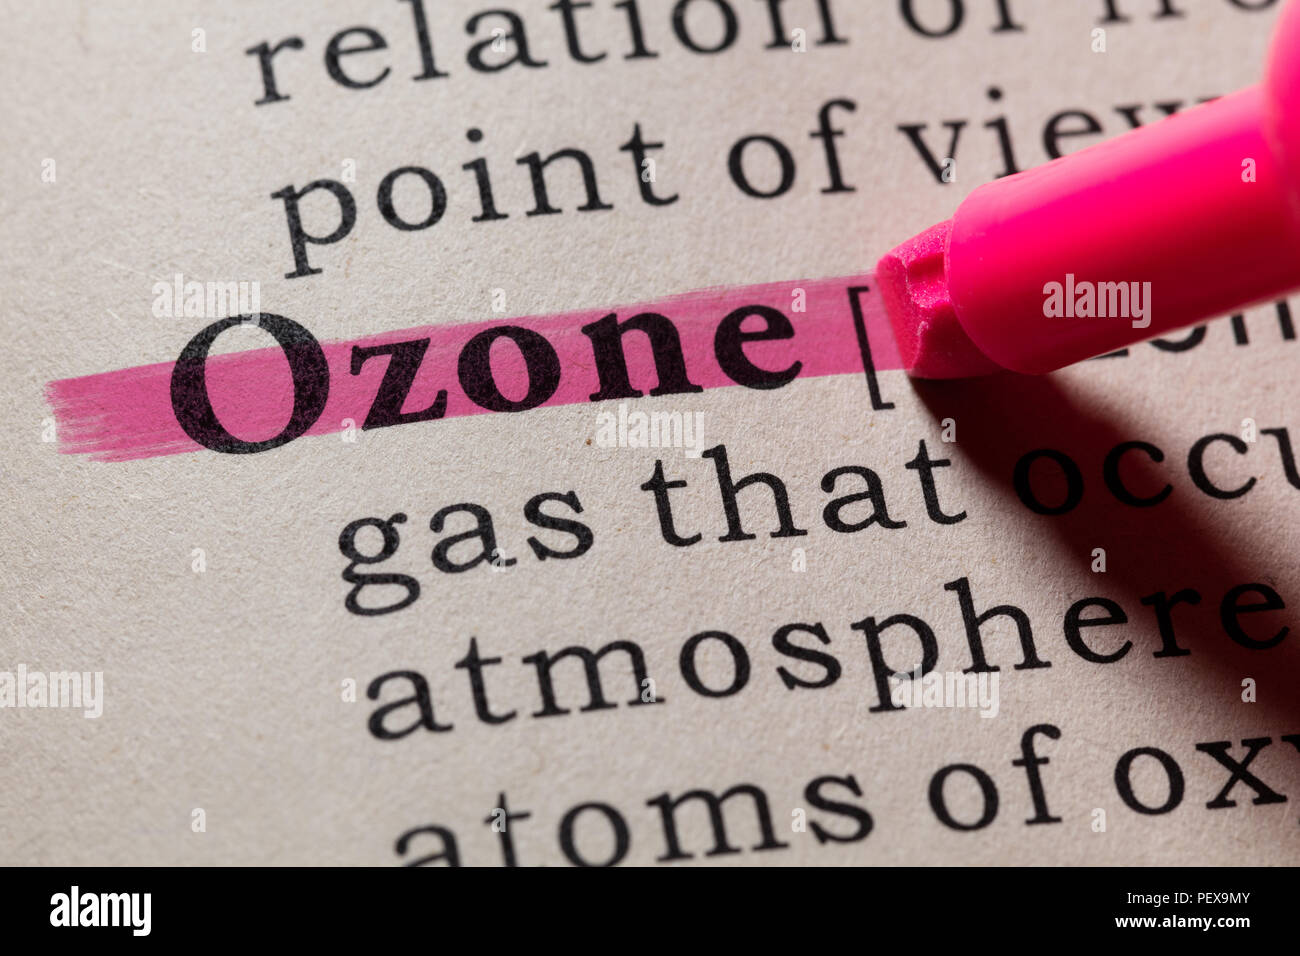 Fake Dictionary, Dictionary definition of the word ozone. including key descriptive words. Stock Photo